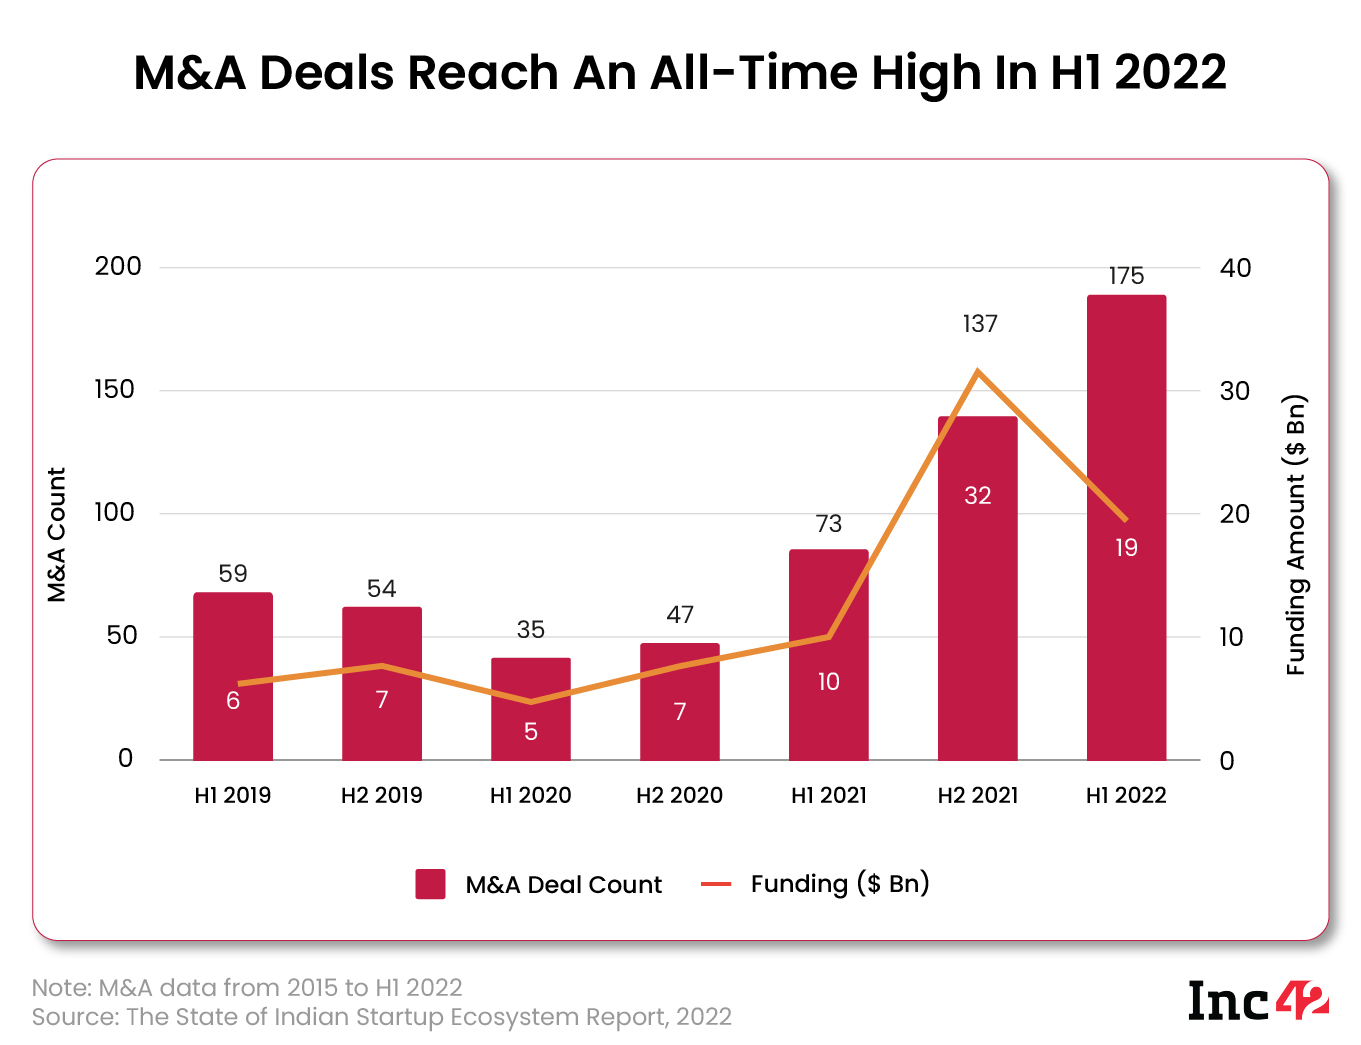 M&A trends